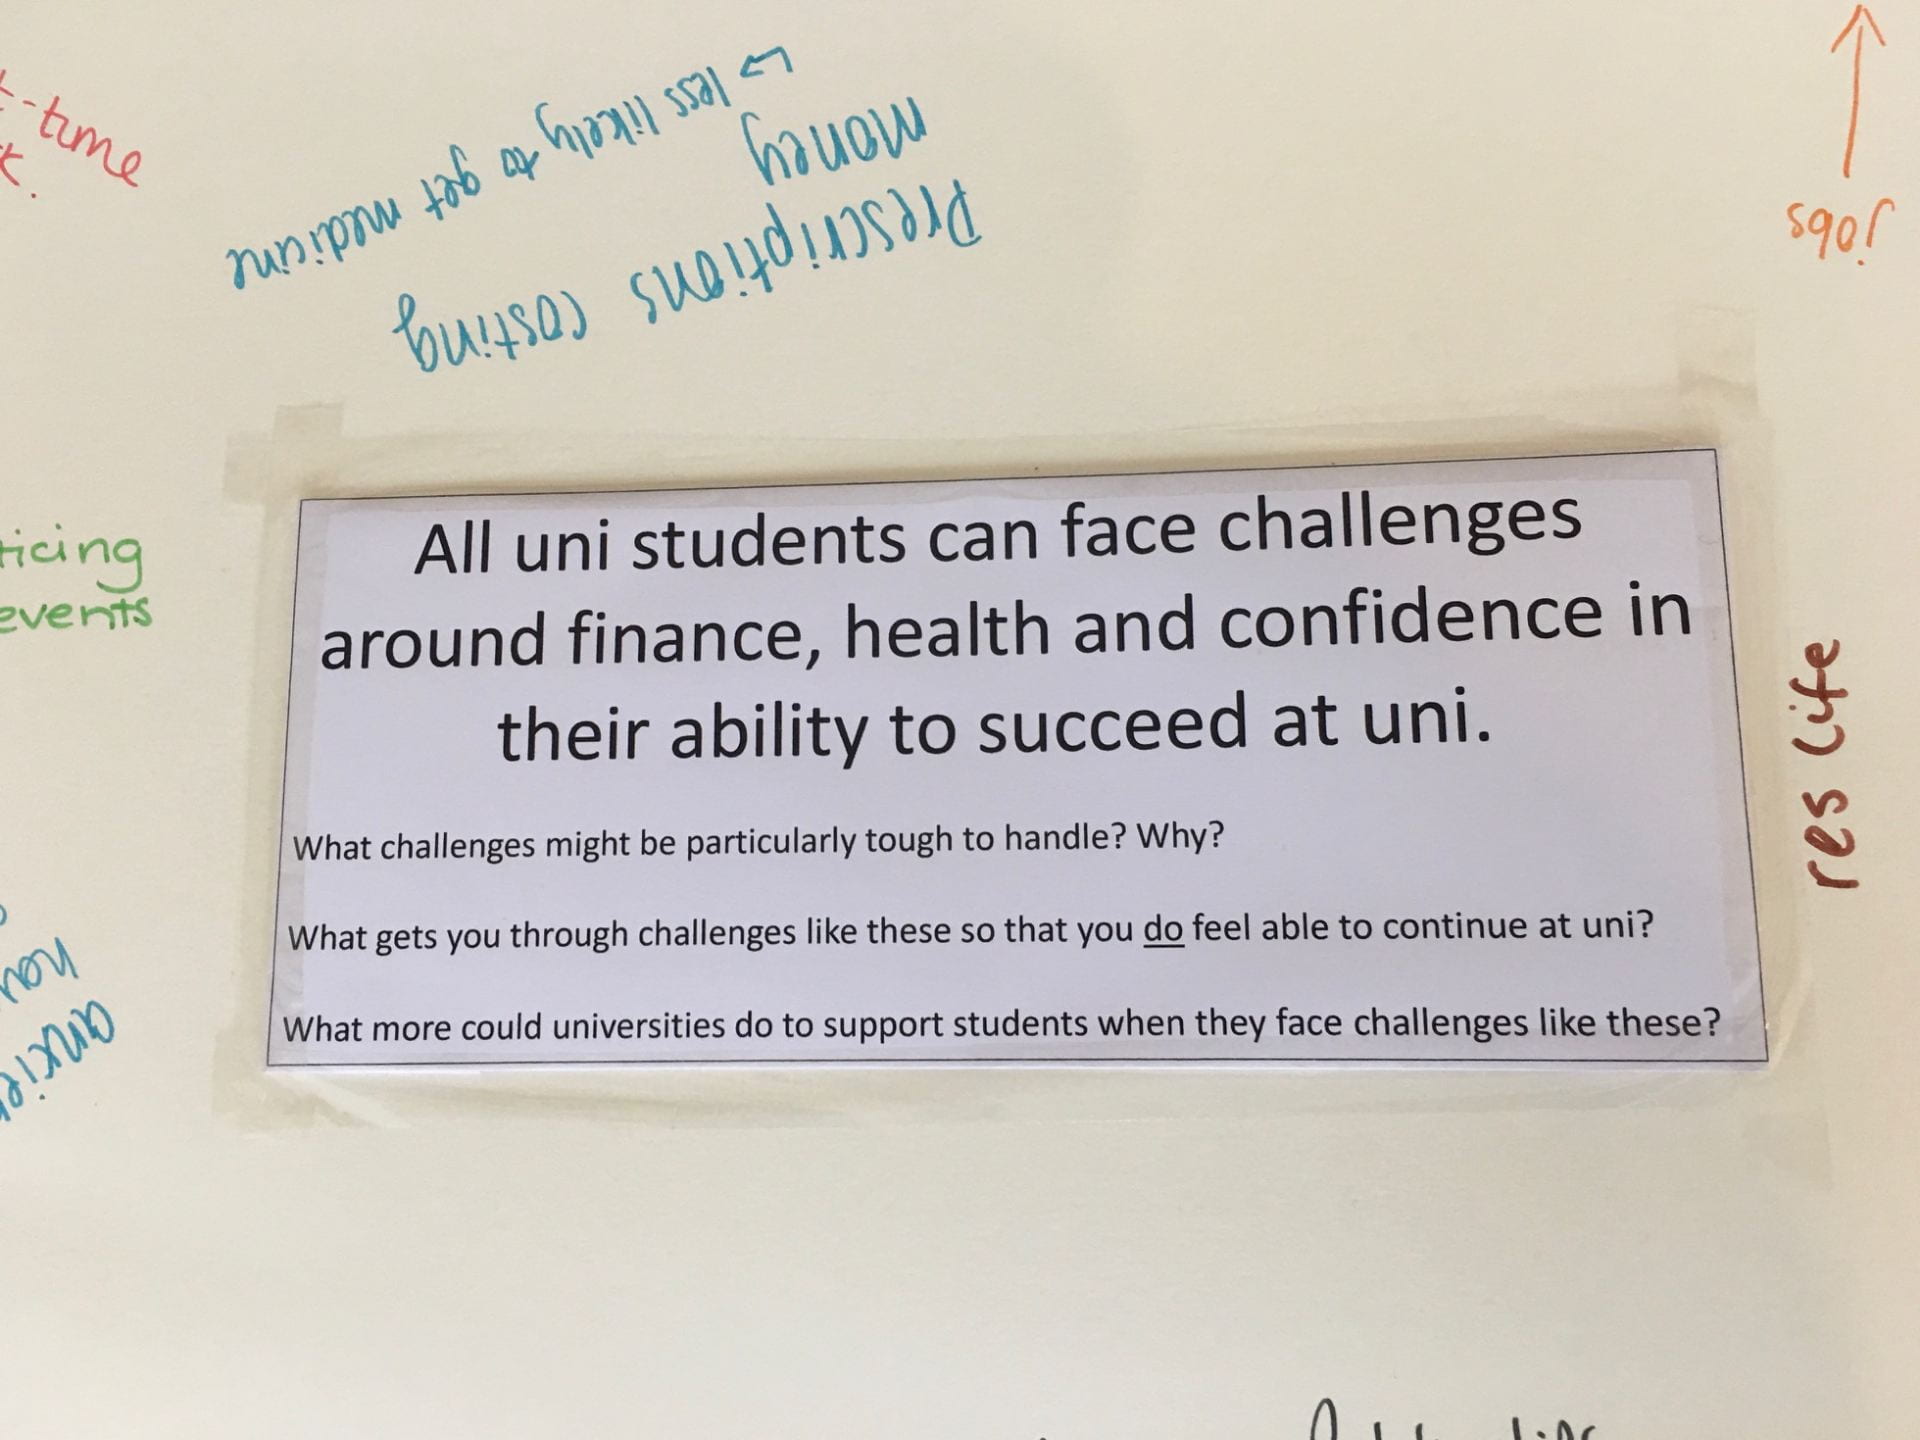 Prompt for student discussion around toughest challenges to face